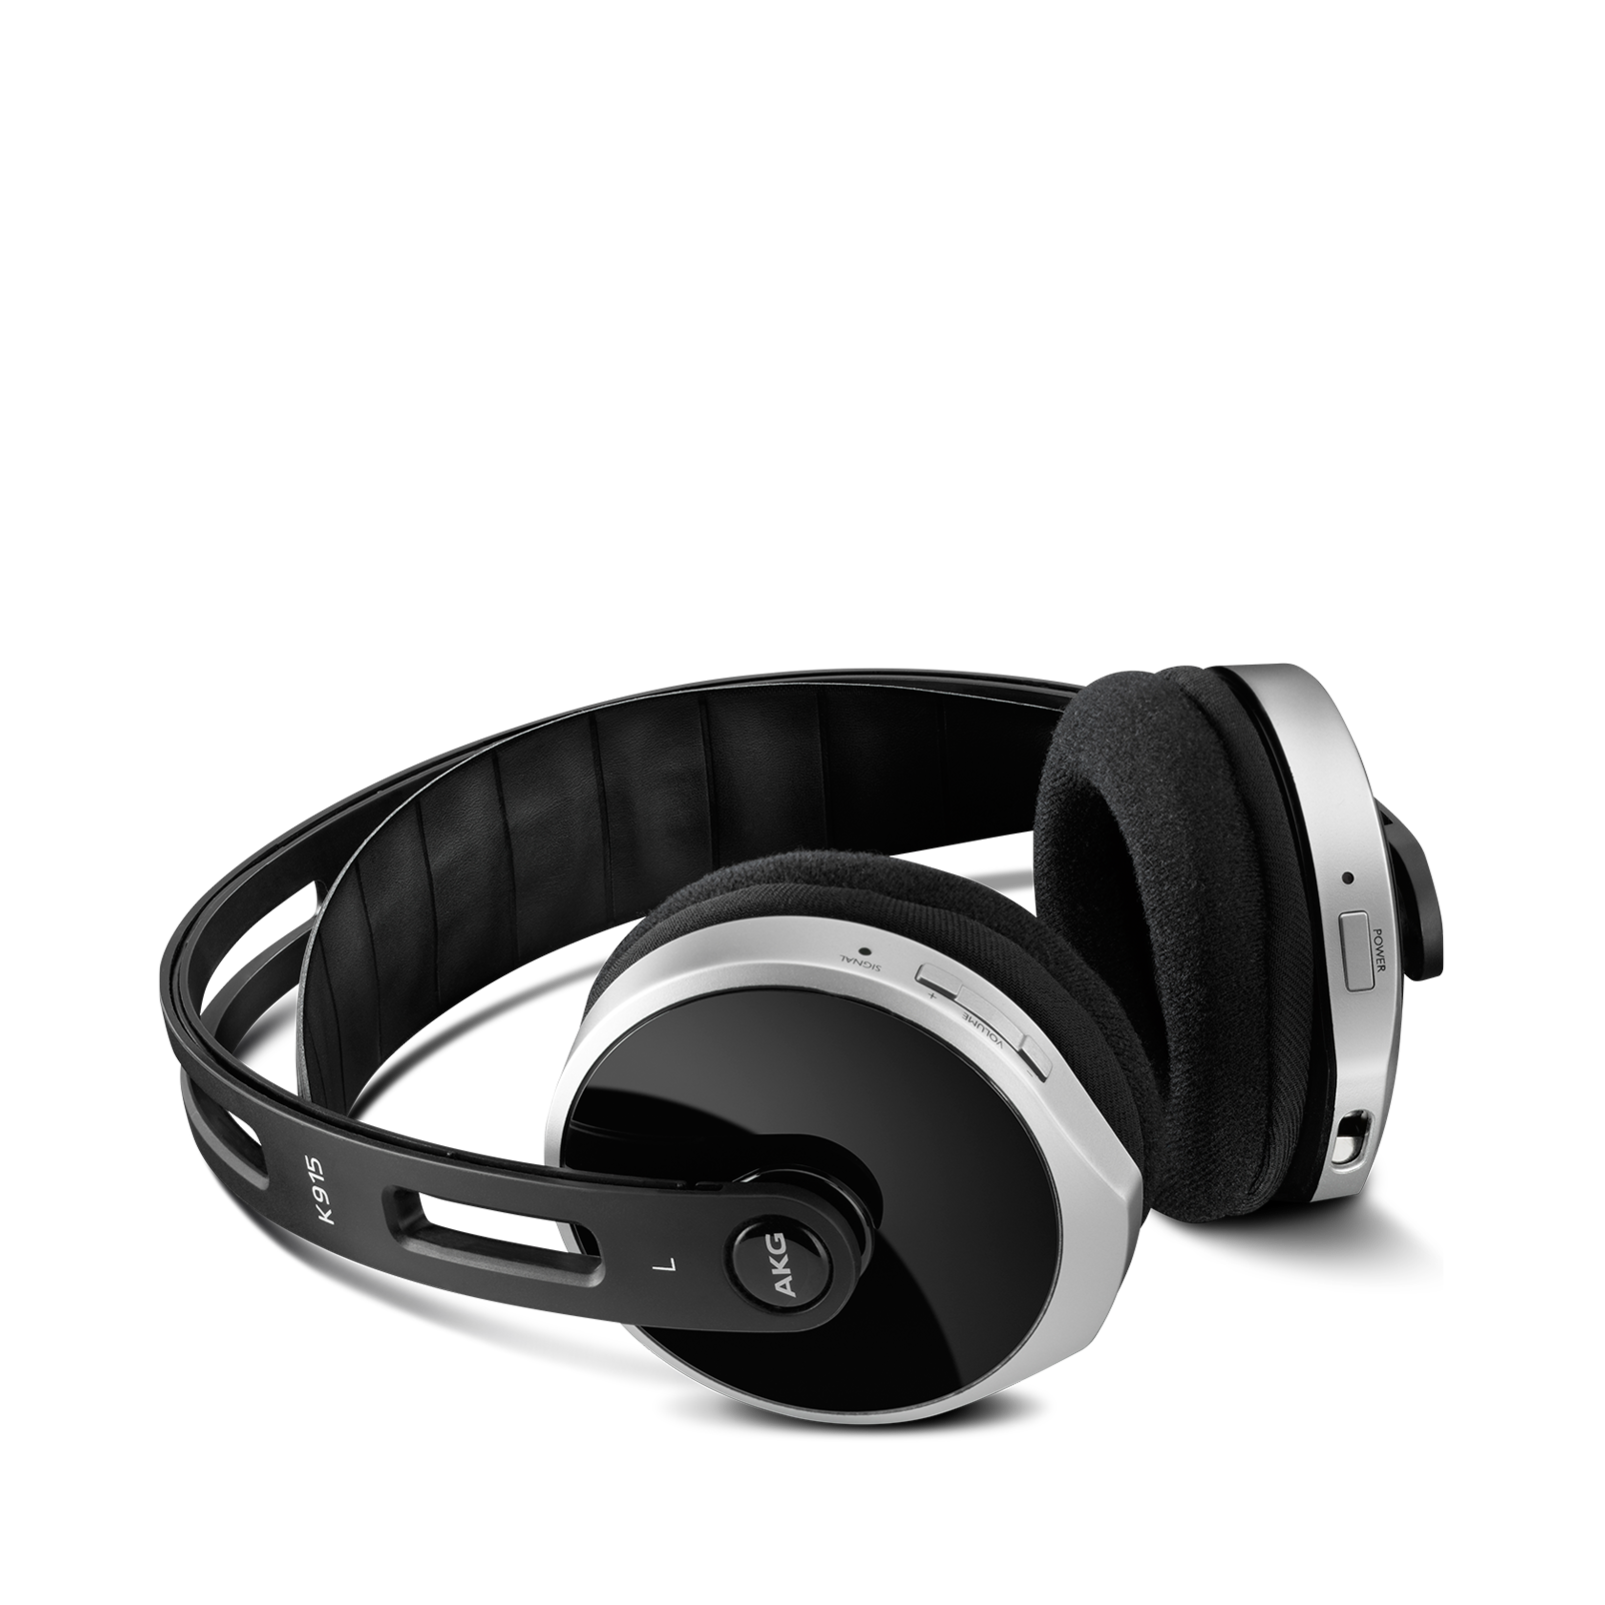 K 915 - Black - Digital wireless stereo headphone optimized for movies, games and music. - Hero